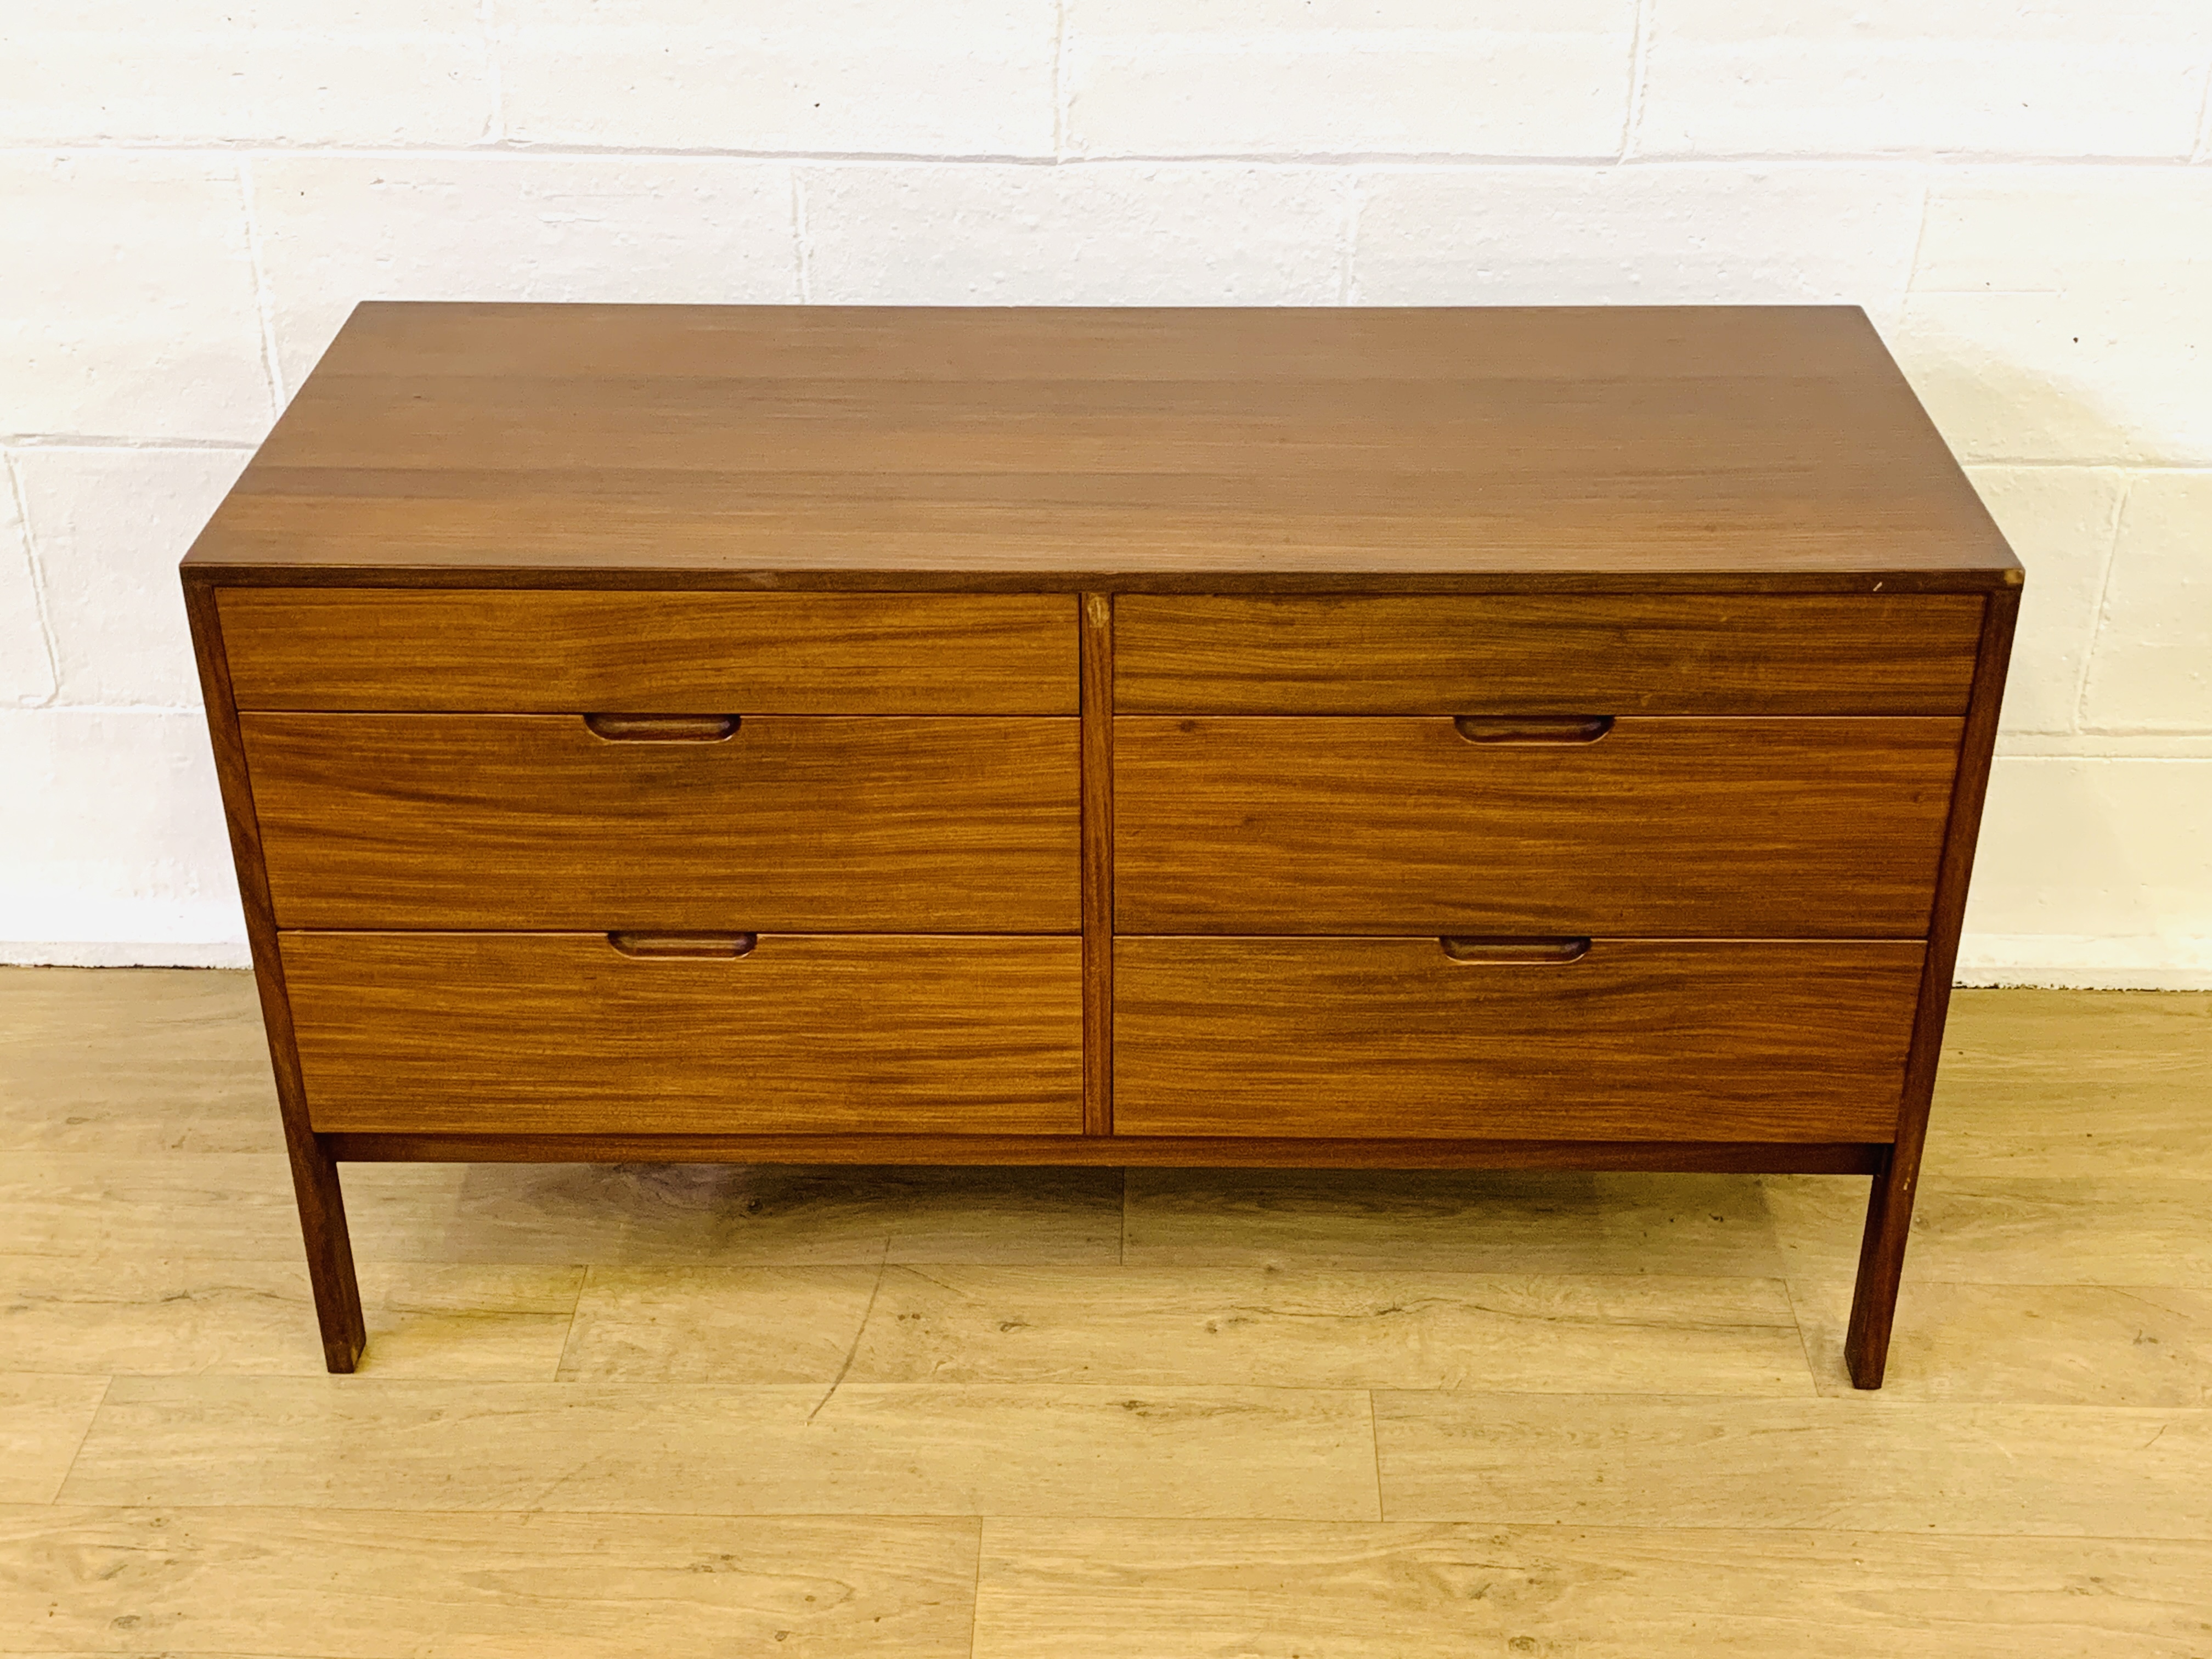 Teak chest of drawers - Image 2 of 7